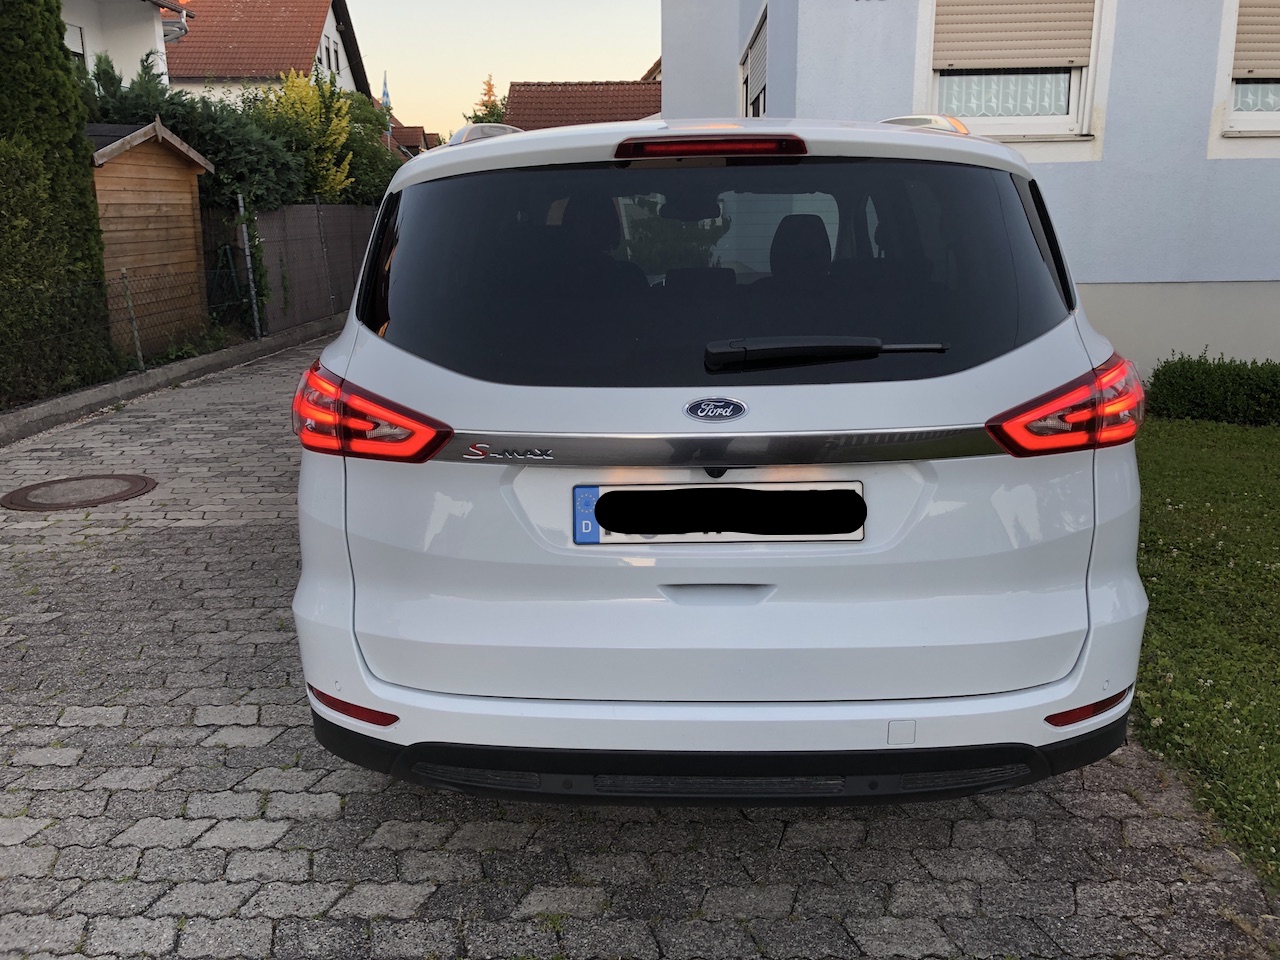 Ford S-Max_003.JPG